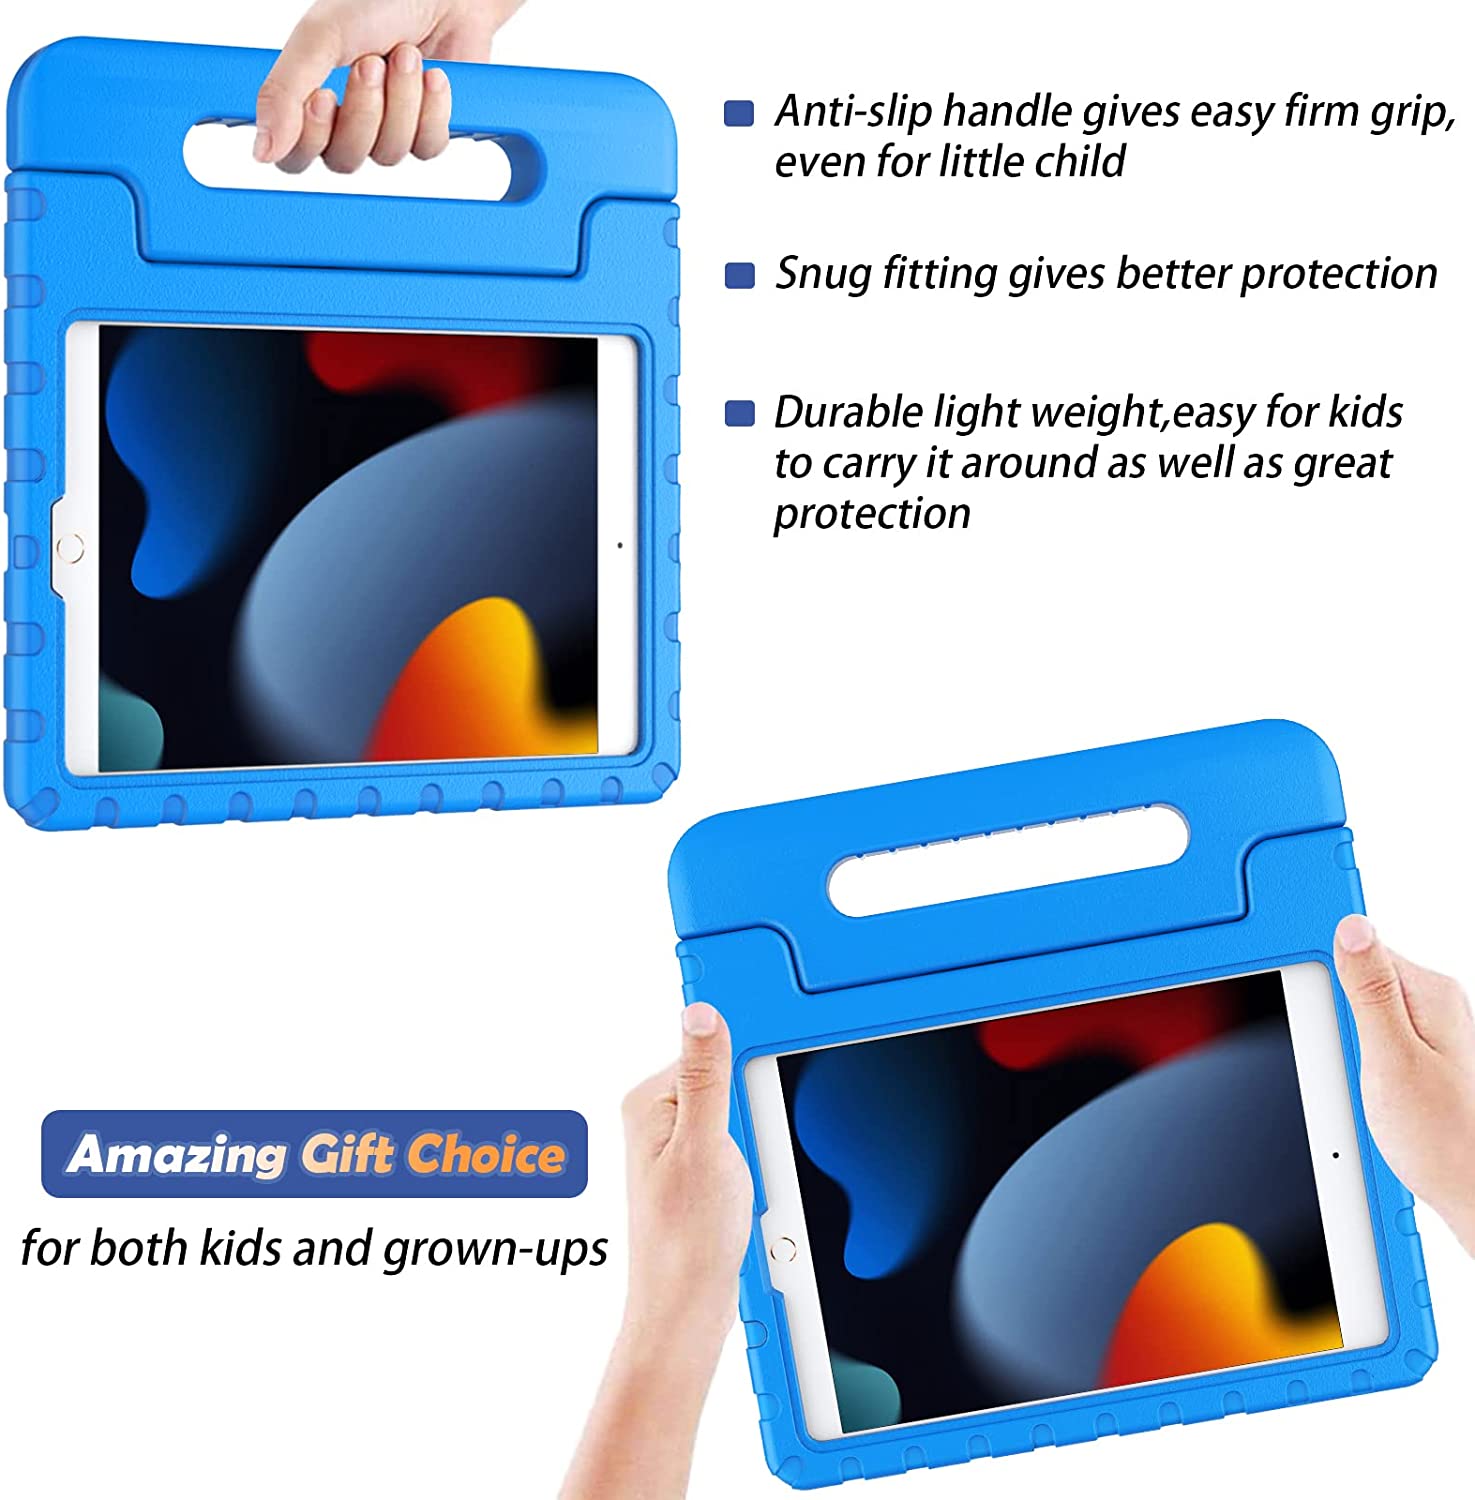 Shockproof Case w Handle & Stand for iPad 9th / 8th / 7th Gen & iPad Air 3 10.5 inch (Blue) *Free Shipping*